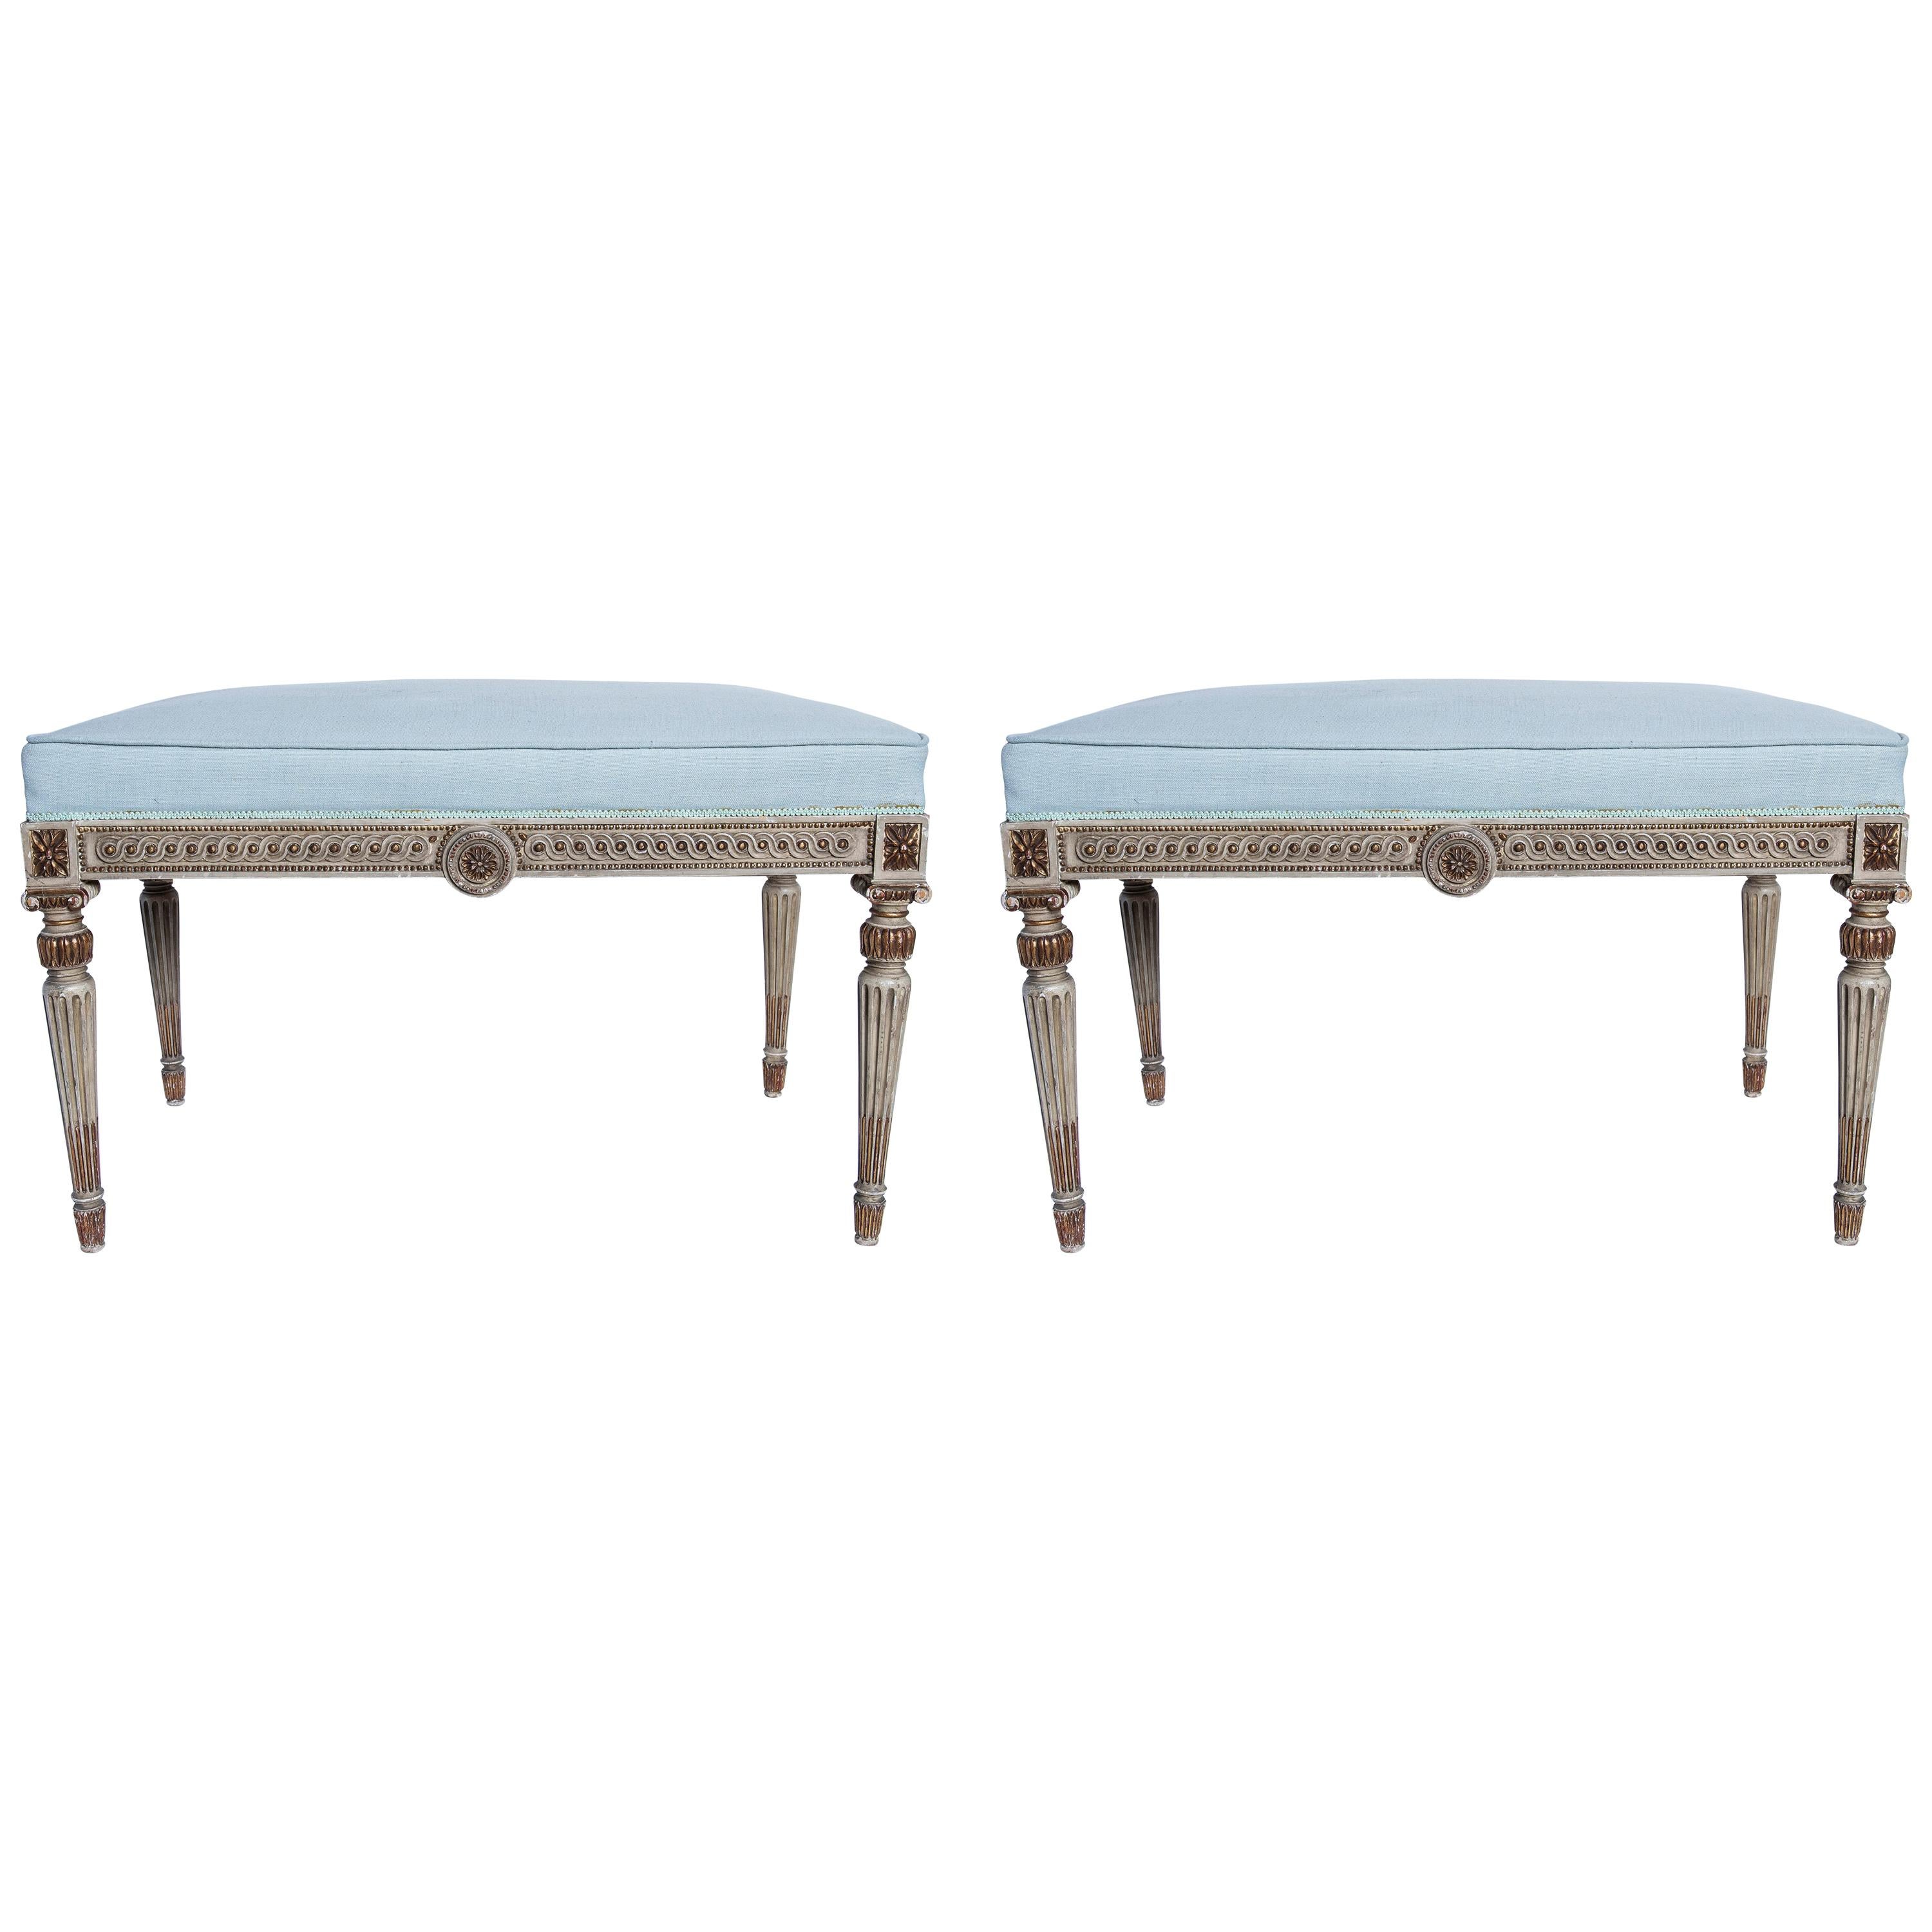 Pair of Patinated Wood Stools, Attributed to Maison Jansen, France, circa 1950 For Sale